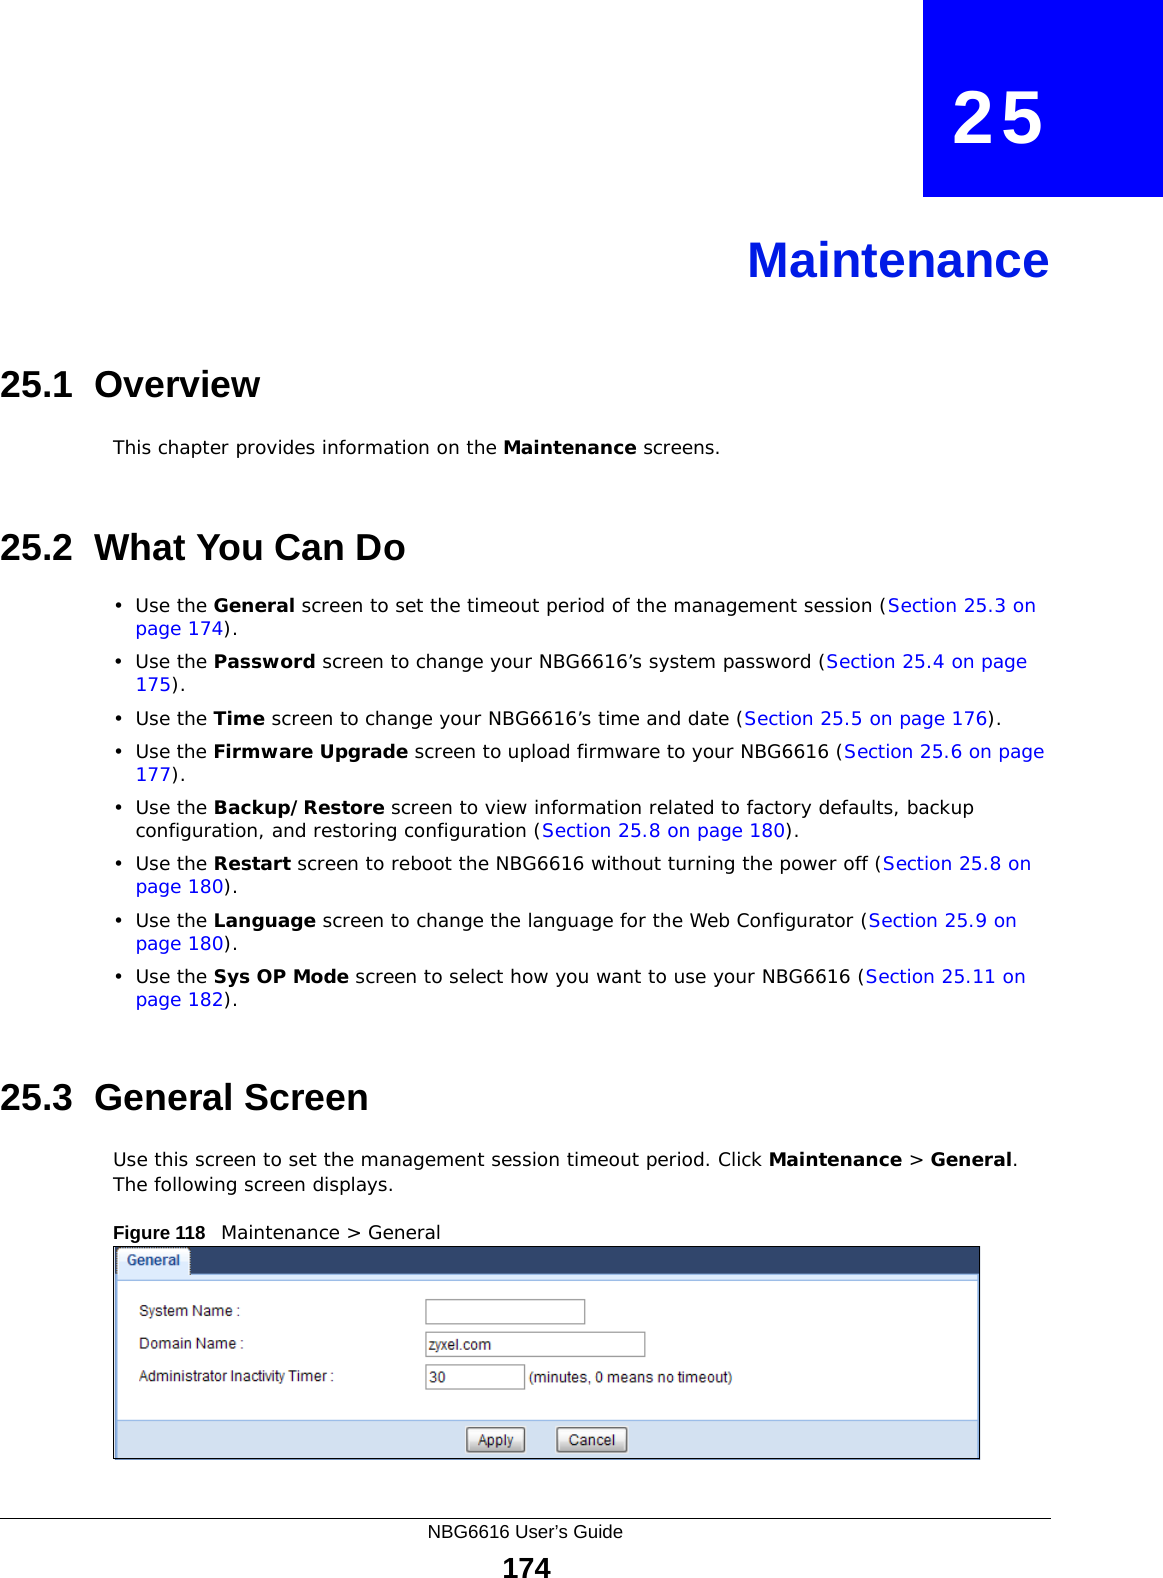 NBG6616 User’s Guide174CHAPTER   25Maintenance25.1  OverviewThis chapter provides information on the Maintenance screens. 25.2  What You Can Do•Use the General screen to set the timeout period of the management session (Section 25.3 on page 174). •Use the Password screen to change your NBG6616’s system password (Section 25.4 on page 175).•Use the Time screen to change your NBG6616’s time and date (Section 25.5 on page 176).•Use the Firmware Upgrade screen to upload firmware to your NBG6616 (Section 25.6 on page 177).•Use the Backup/Restore screen to view information related to factory defaults, backup configuration, and restoring configuration (Section 25.8 on page 180).•Use the Restart screen to reboot the NBG6616 without turning the power off (Section 25.8 on page 180).•Use the Language screen to change the language for the Web Configurator (Section 25.9 on page 180).•Use the Sys OP Mode screen to select how you want to use your NBG6616 (Section 25.11 on page 182). 25.3  General Screen Use this screen to set the management session timeout period. Click Maintenance &gt; General. The following screen displays.Figure 118   Maintenance &gt; General 